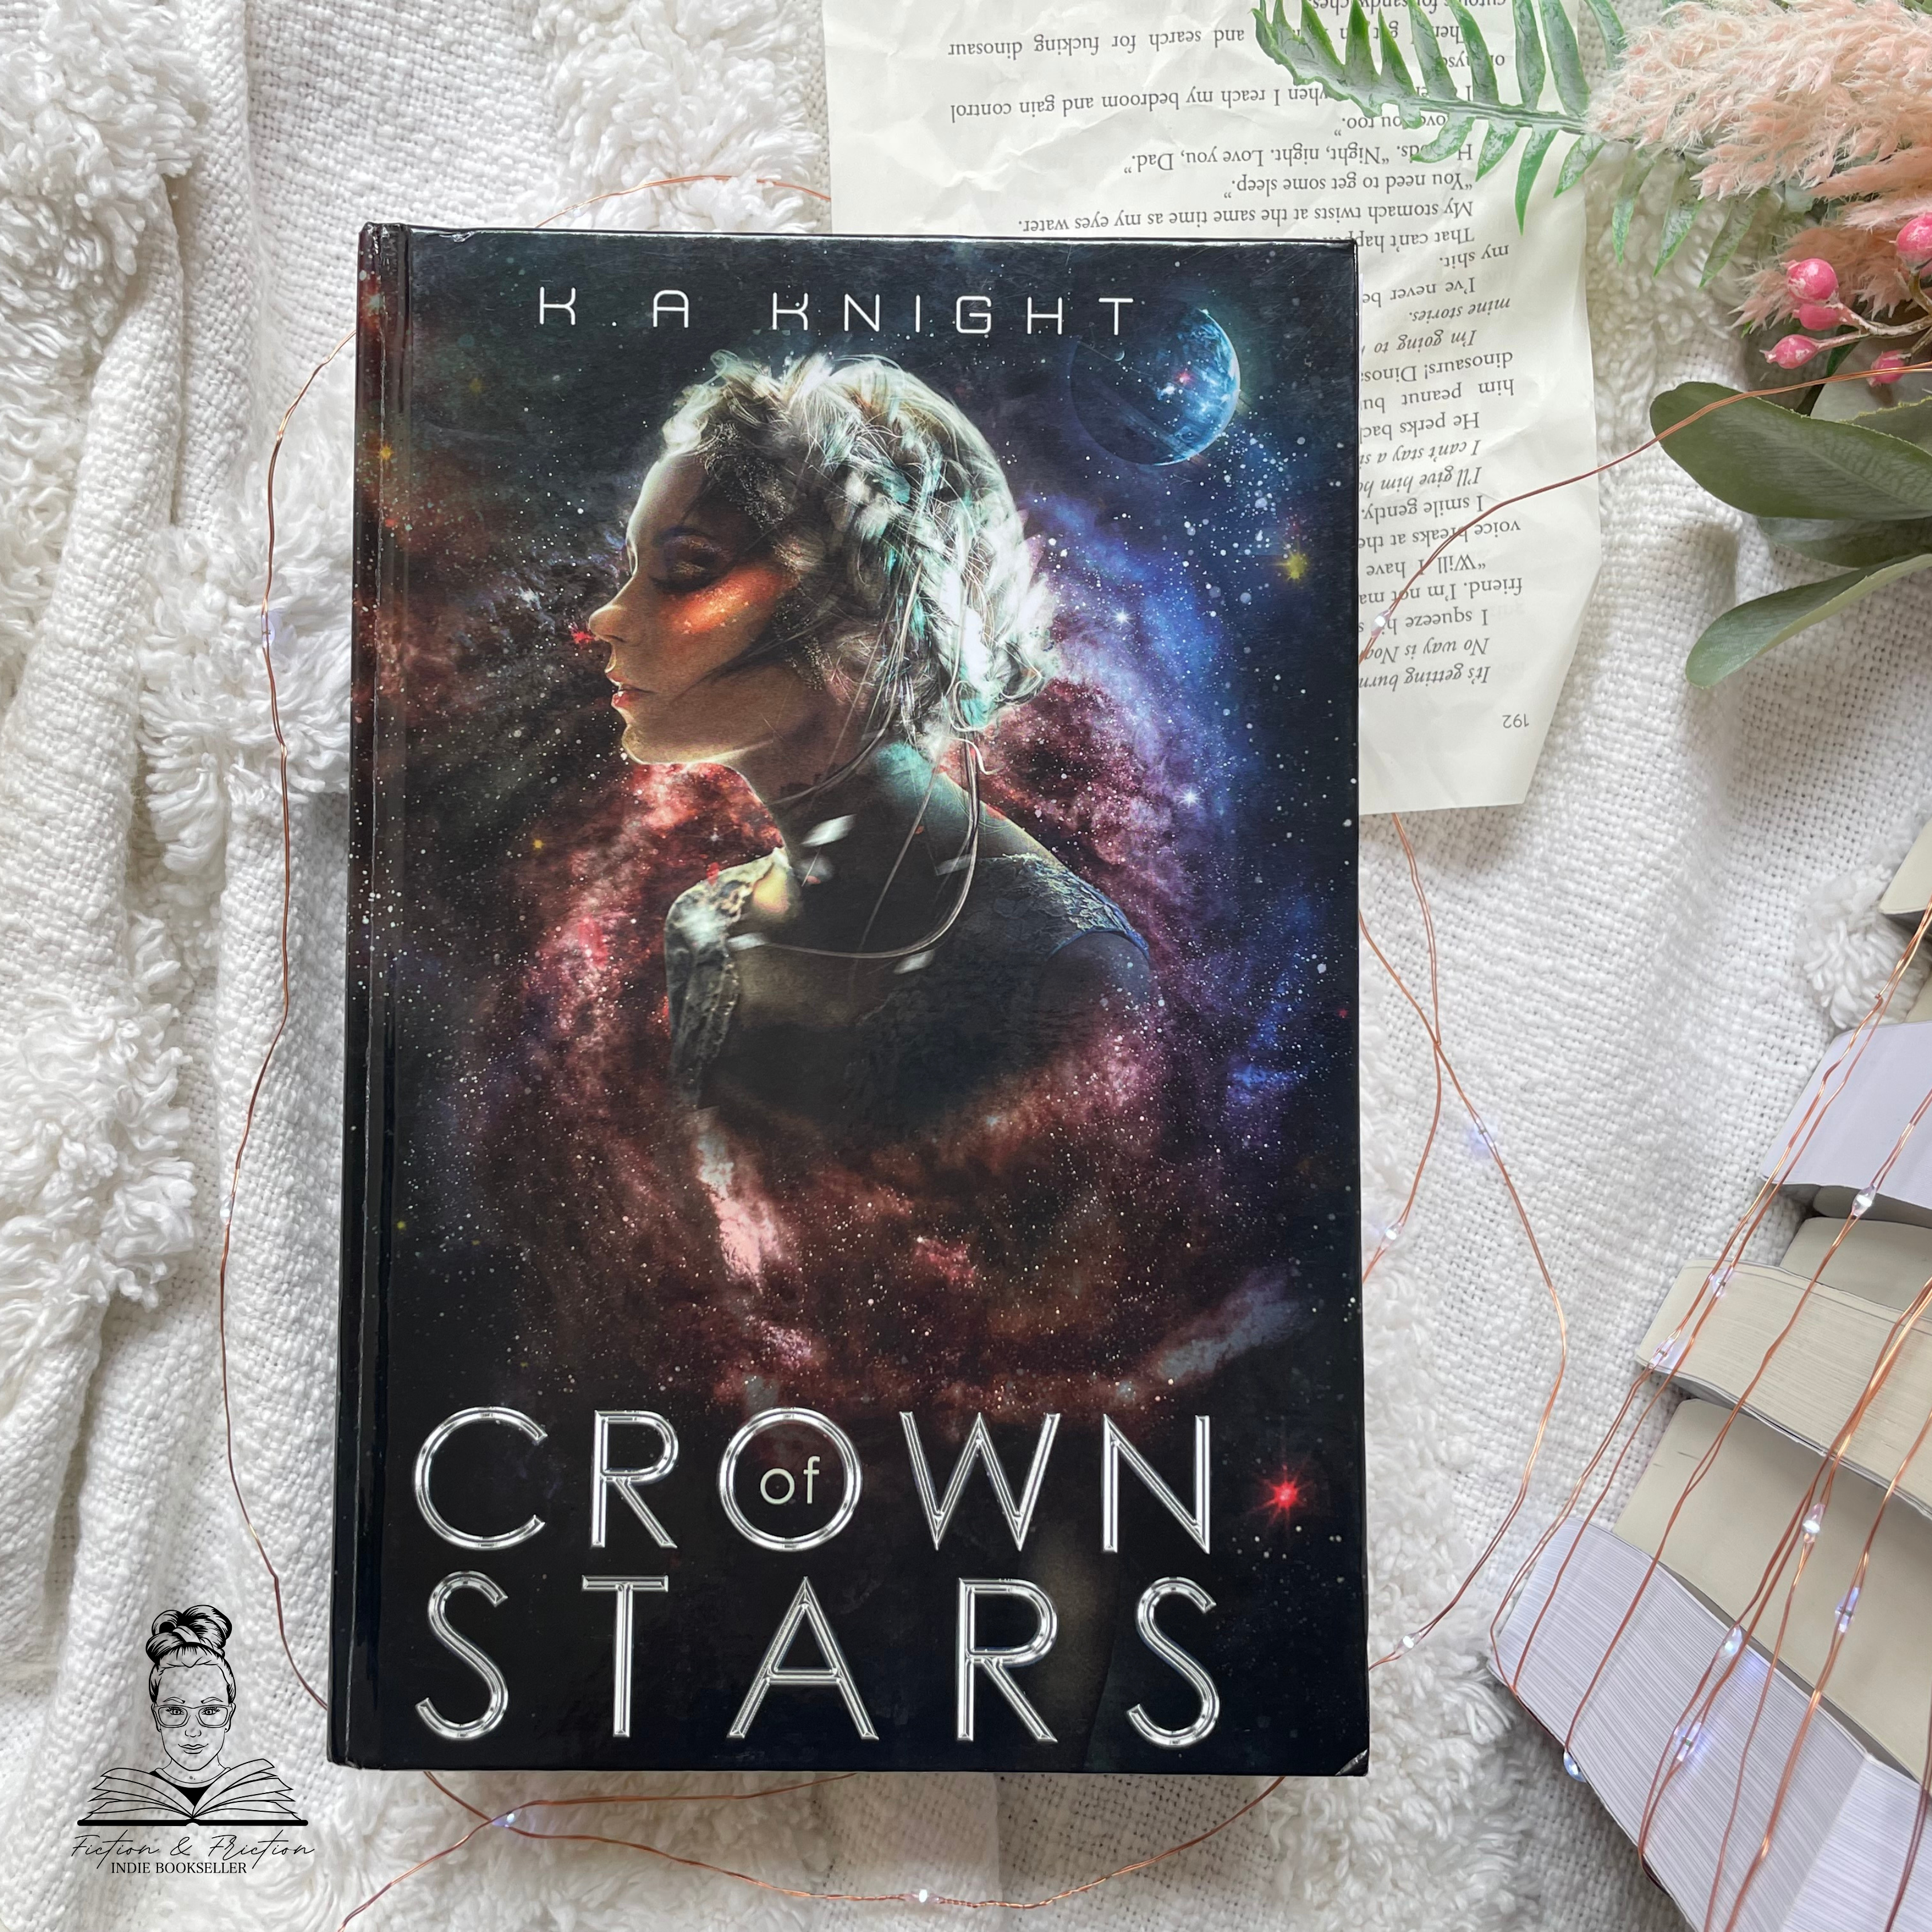 Crown of Stars: Hardcover by K.A Knight